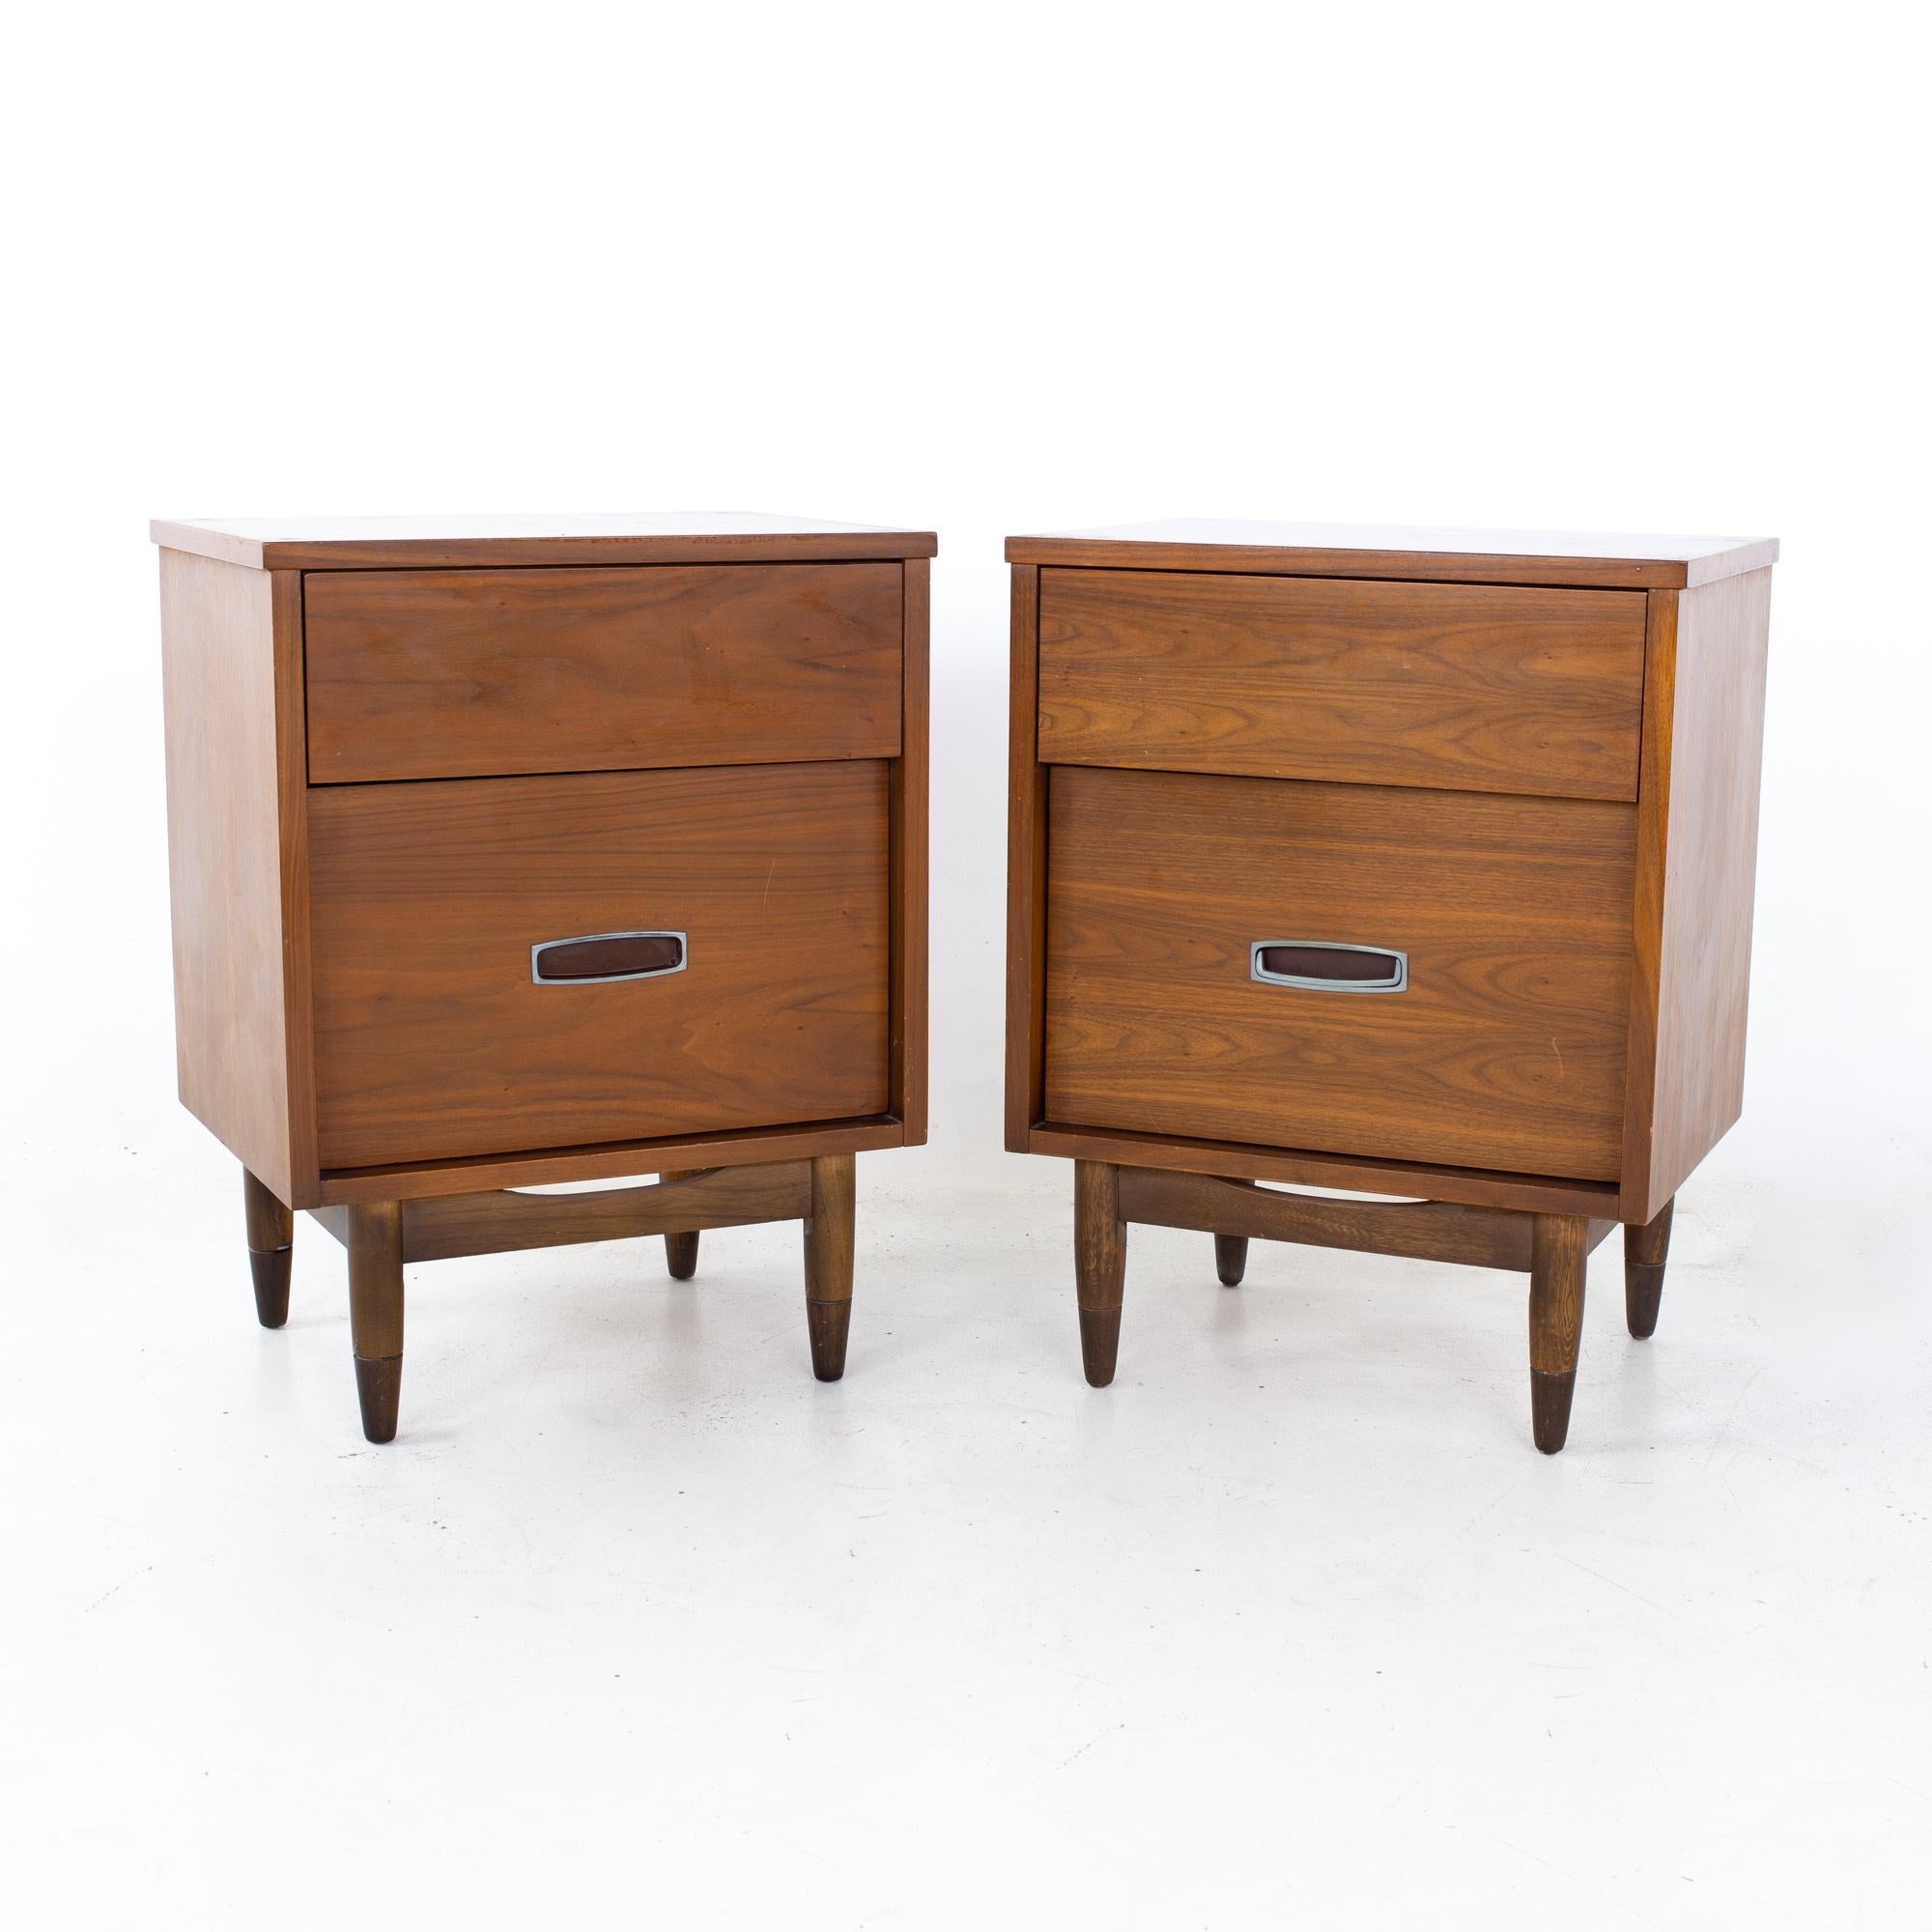 Mainline by Hooker Mid Century walnut and stainless nightstands, a pair
Each nightstand measures: 20 wide x 15 deep x 26 inches high

All pieces of furniture can be had in what we call restored vintage condition. That means the piece is restored